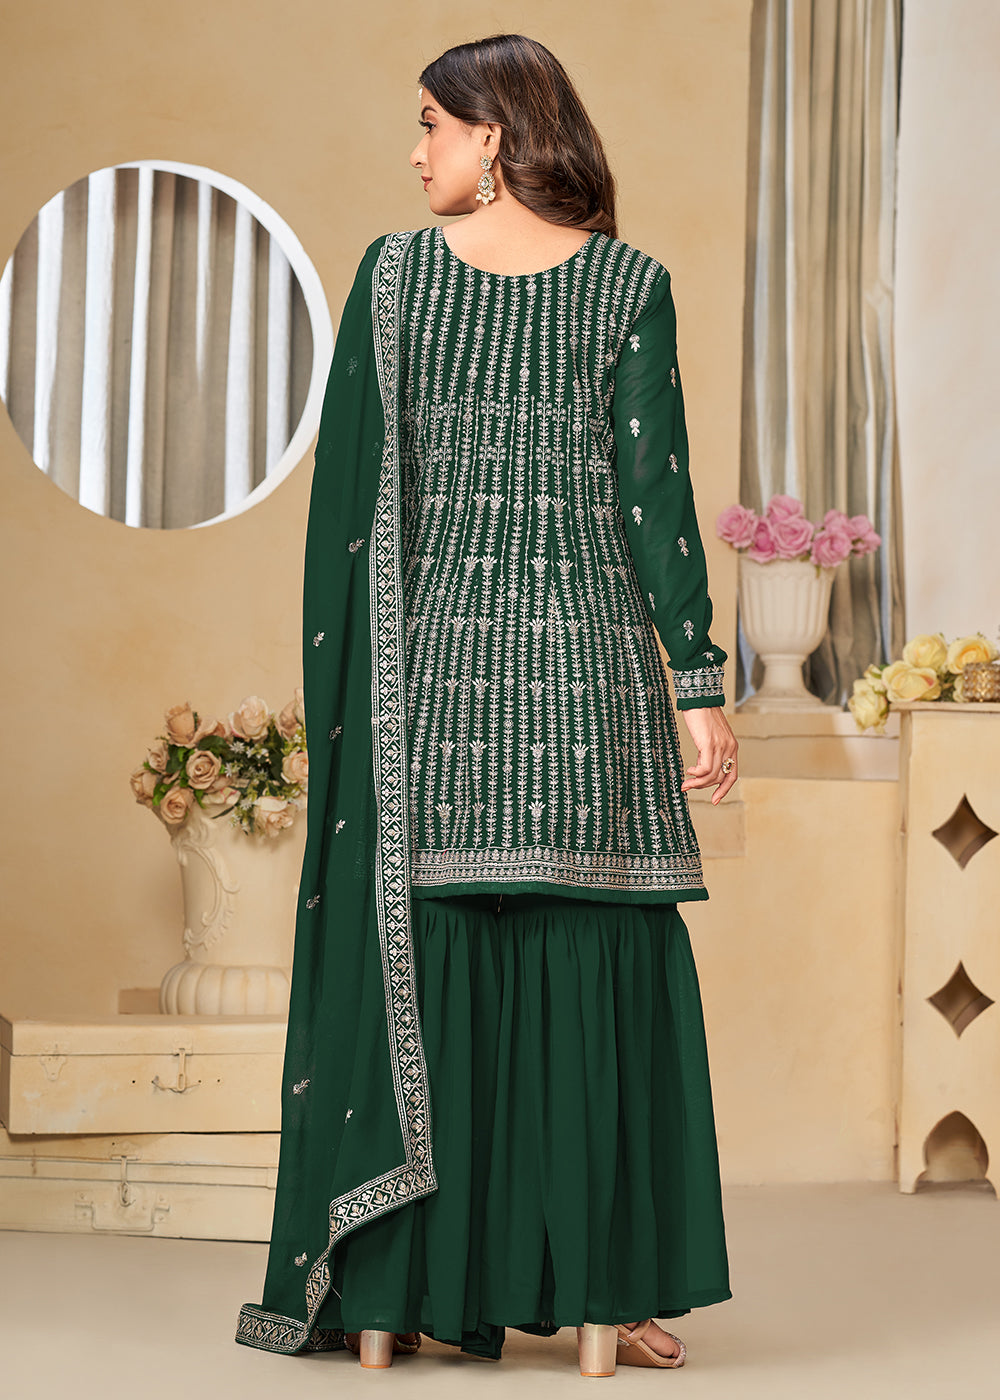 Shop Now Faux Georgette Green Embroidered Gharara Style Suit Online at Empress Clothing in USA, UK, Canada, Italy & Worldwide. 